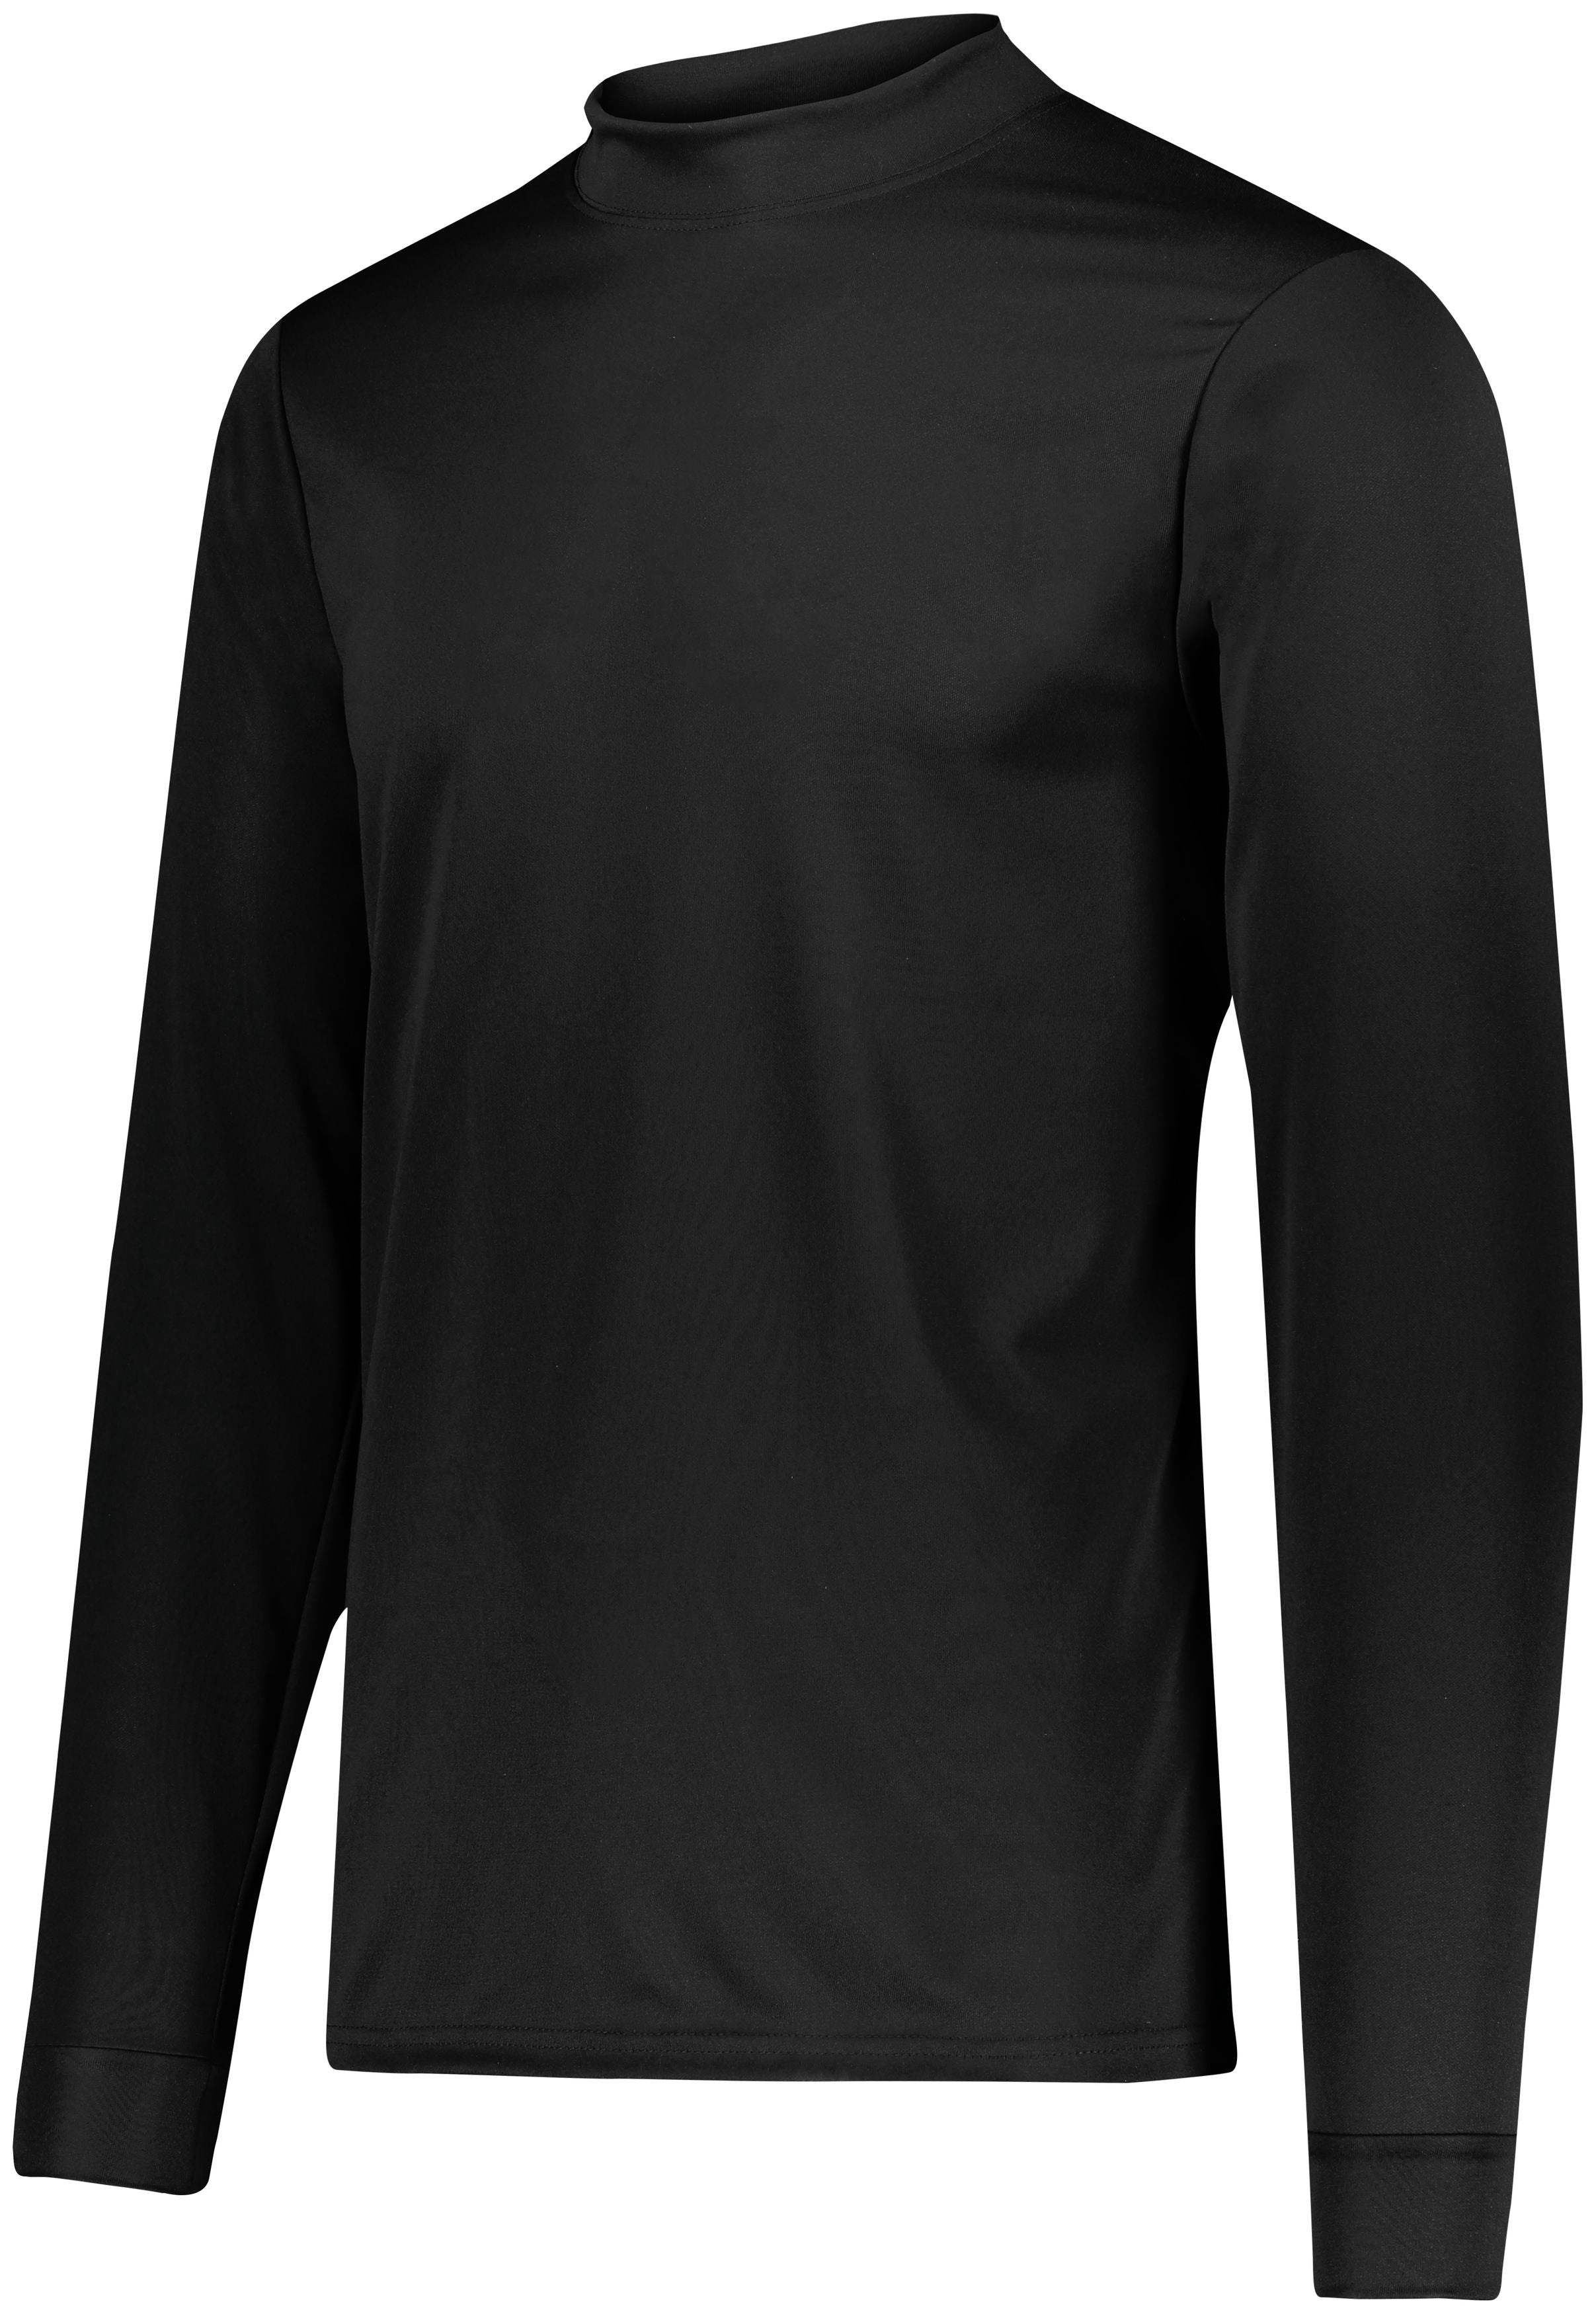 Augusta Sportswear Wicking Mock Turtleneck in Black  -Part of the Adult, Augusta-Products, Tennis, Shirts product lines at KanaleyCreations.com